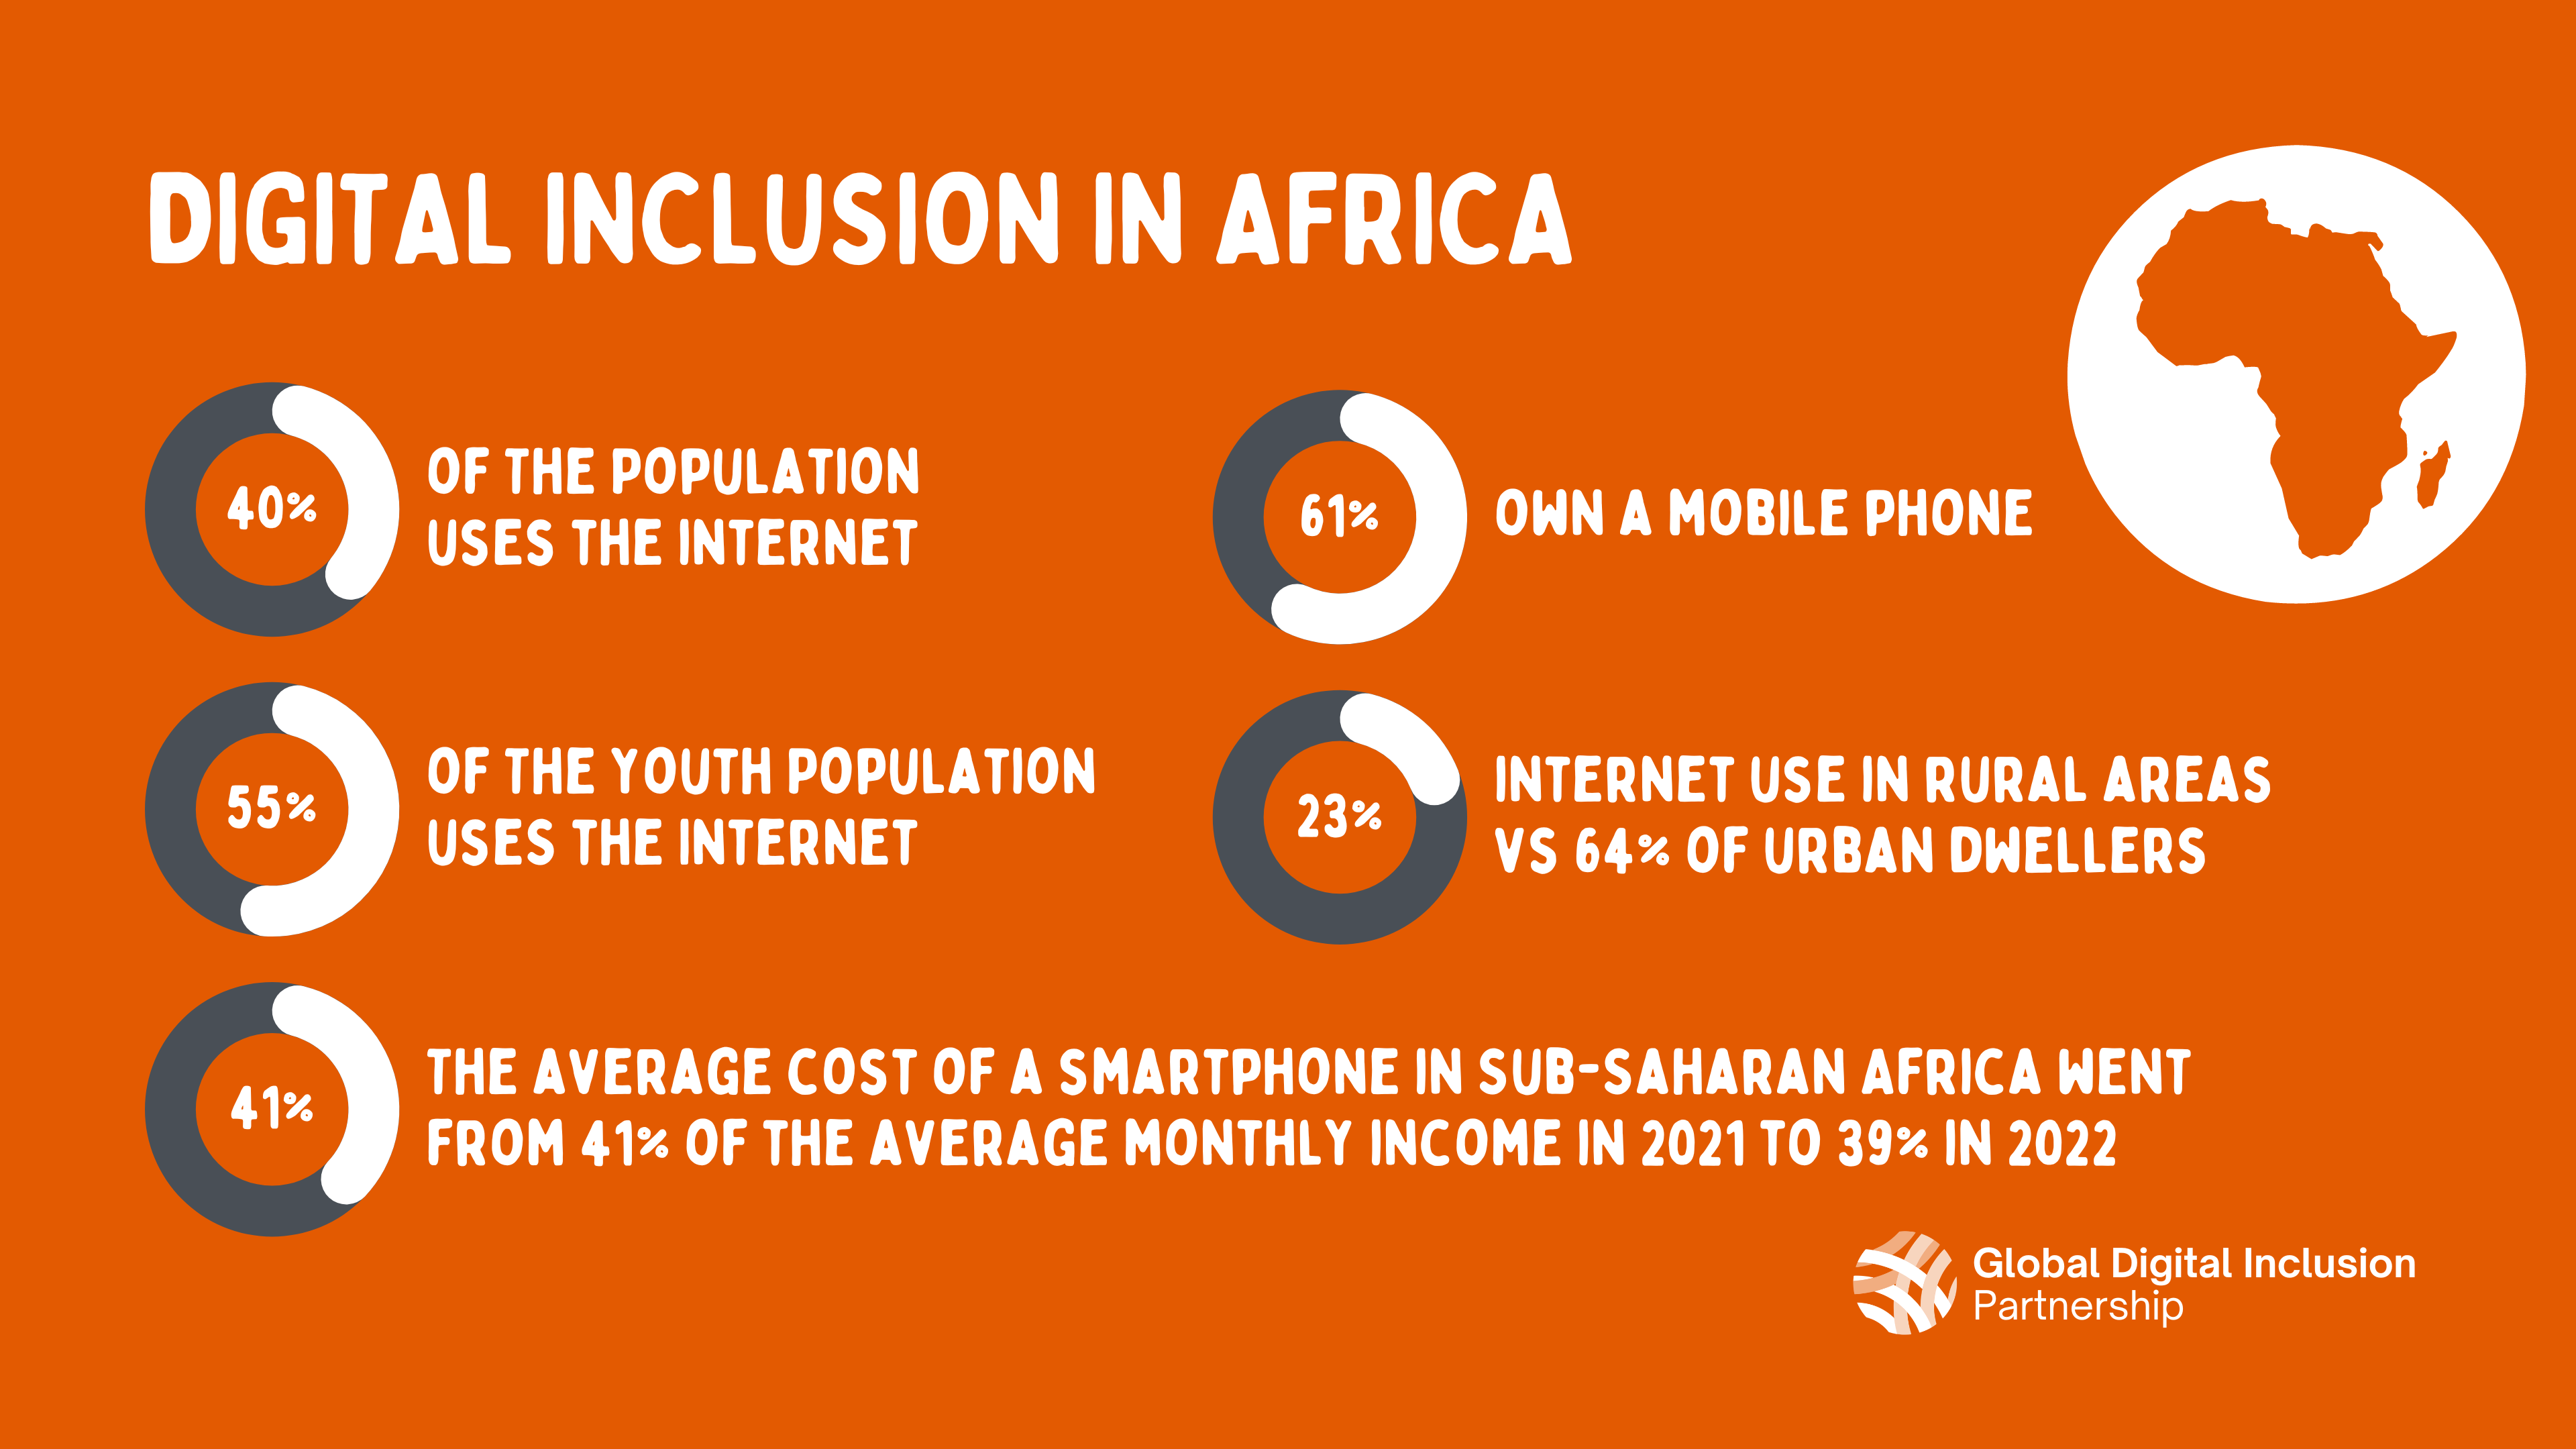 Digital Inclusion in Africa
40% of the population uses the internet
61% own a mobile phone
55% of the youth population uses the Internet
23% internet use in rural areas vs 64% of urban dwellers
The average cost of a smartphone in Sub-Saharan Africa went from 41% of the average monthly income in 2021 to 39% in 2022